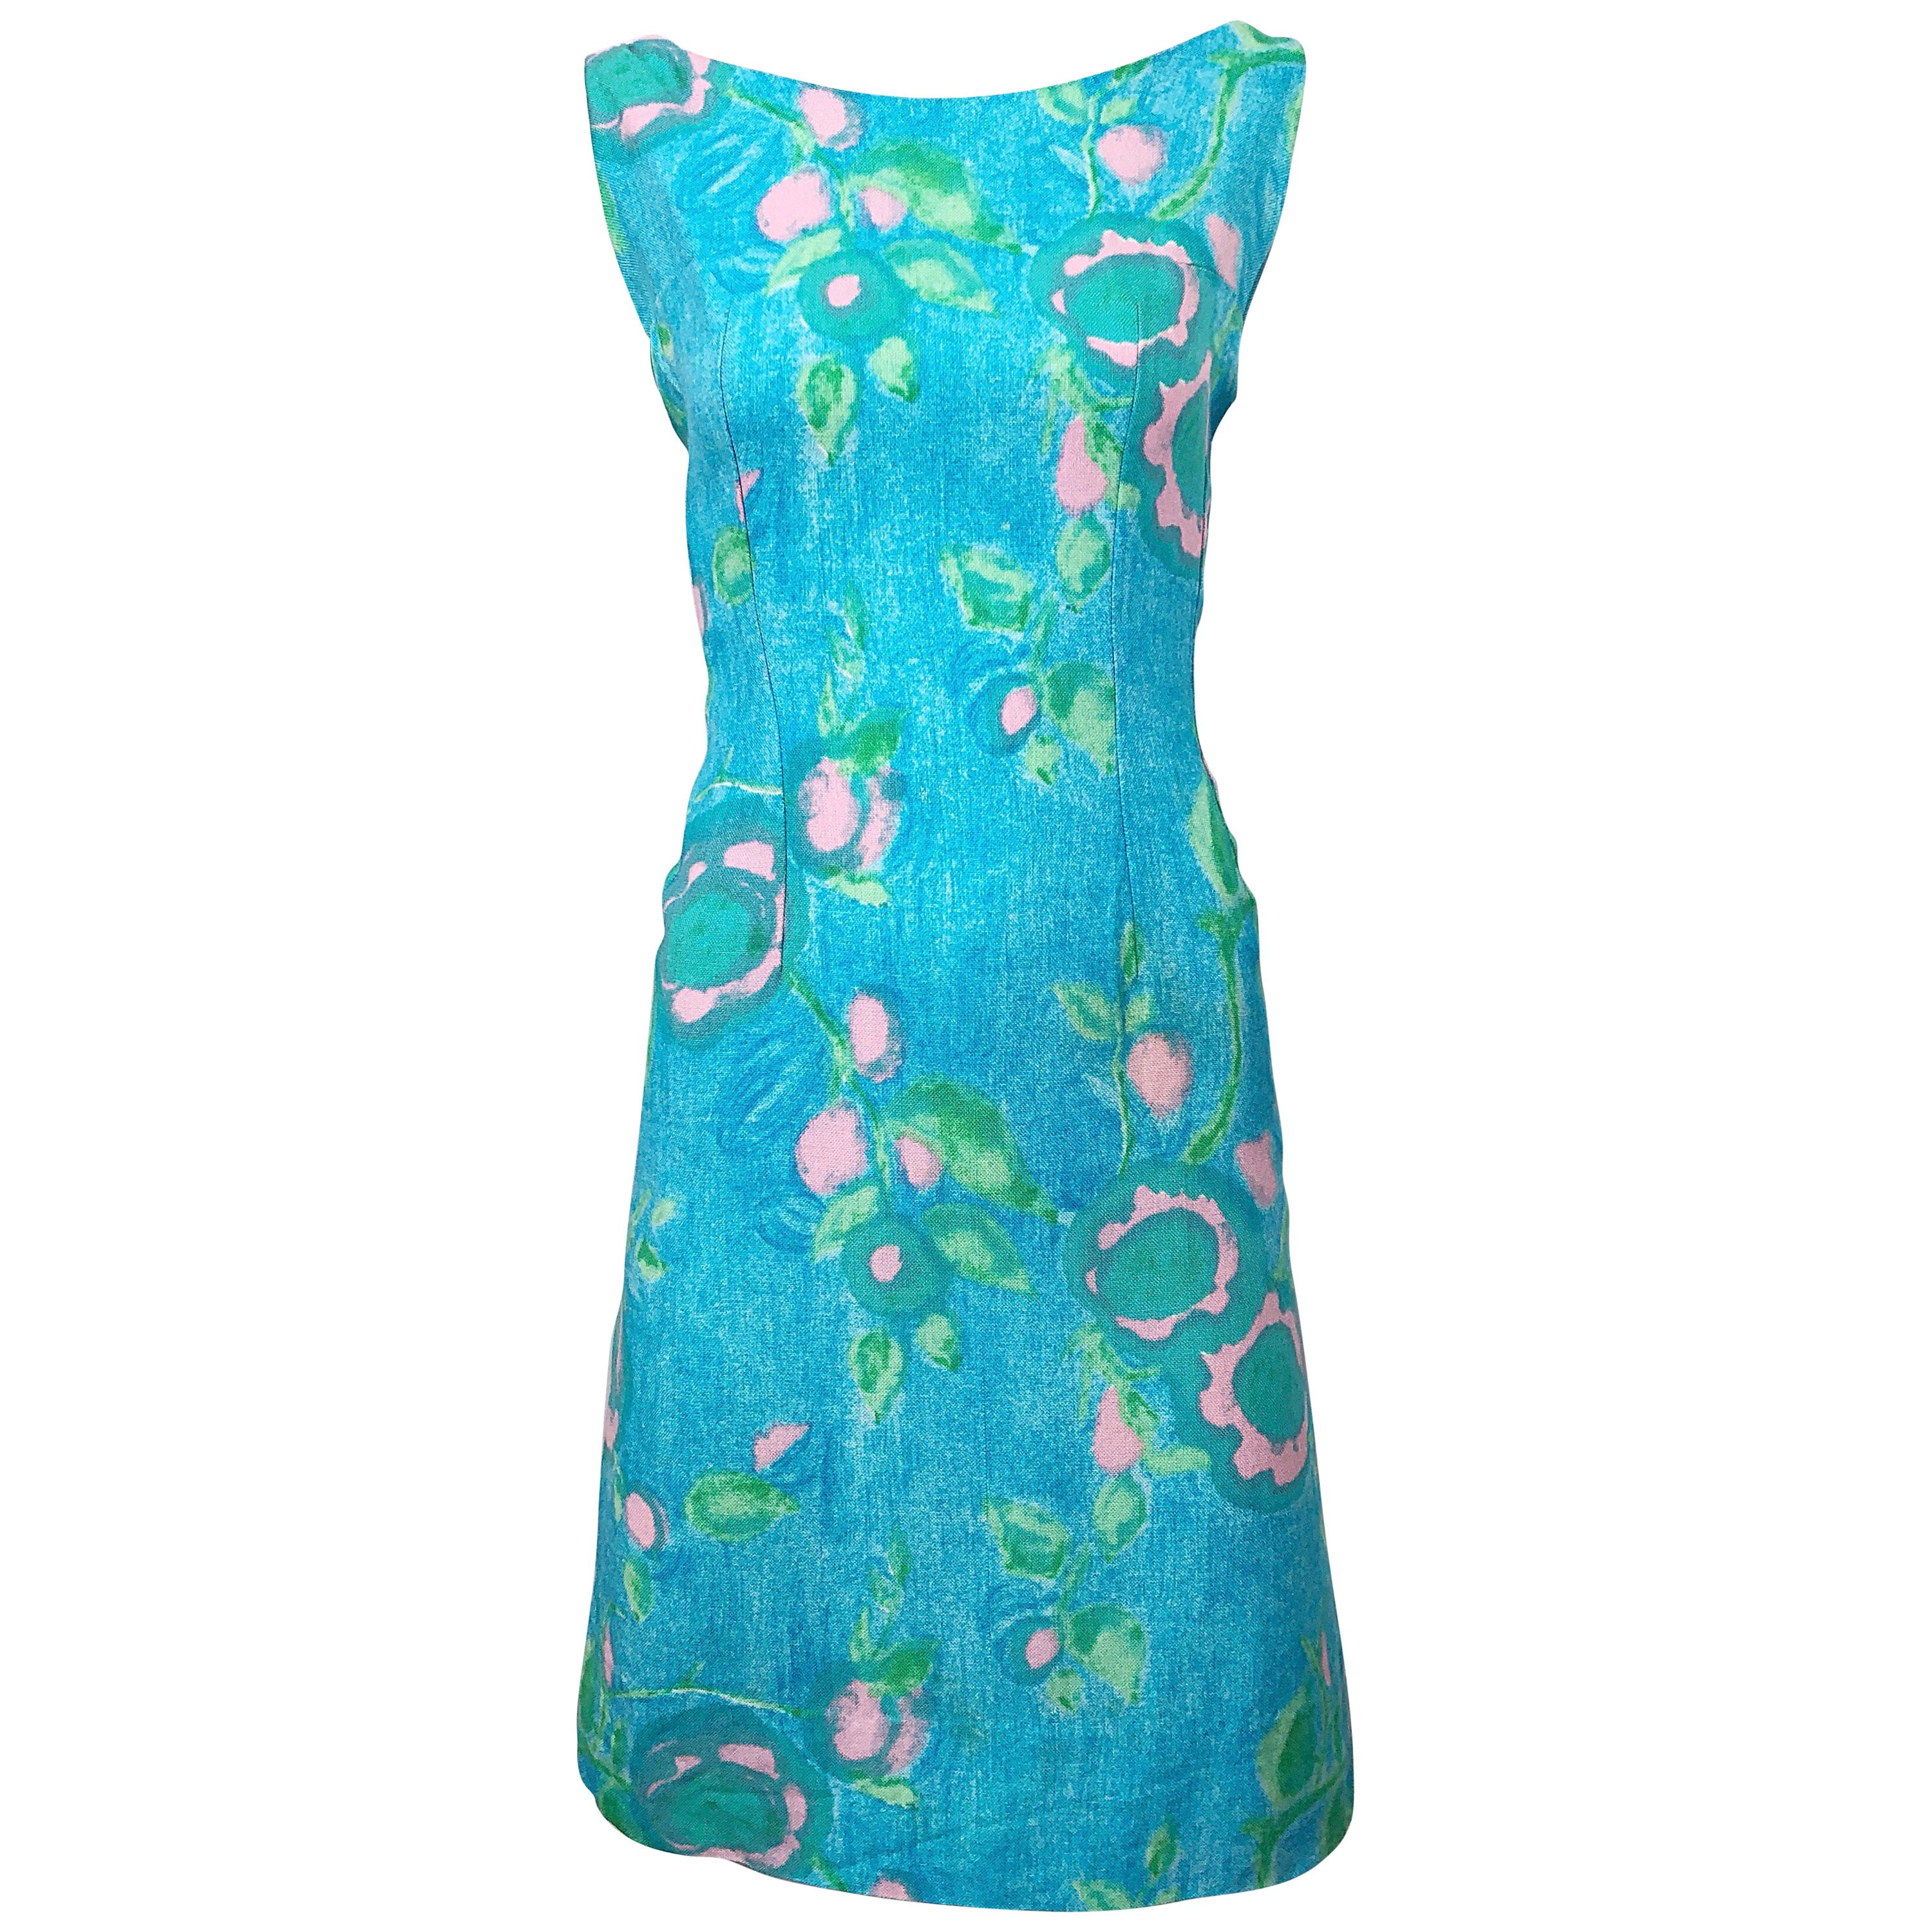 Chic 1960s Blue + Green + Pink Linen Watercolor Vintage 60s Shift Dress For Sale